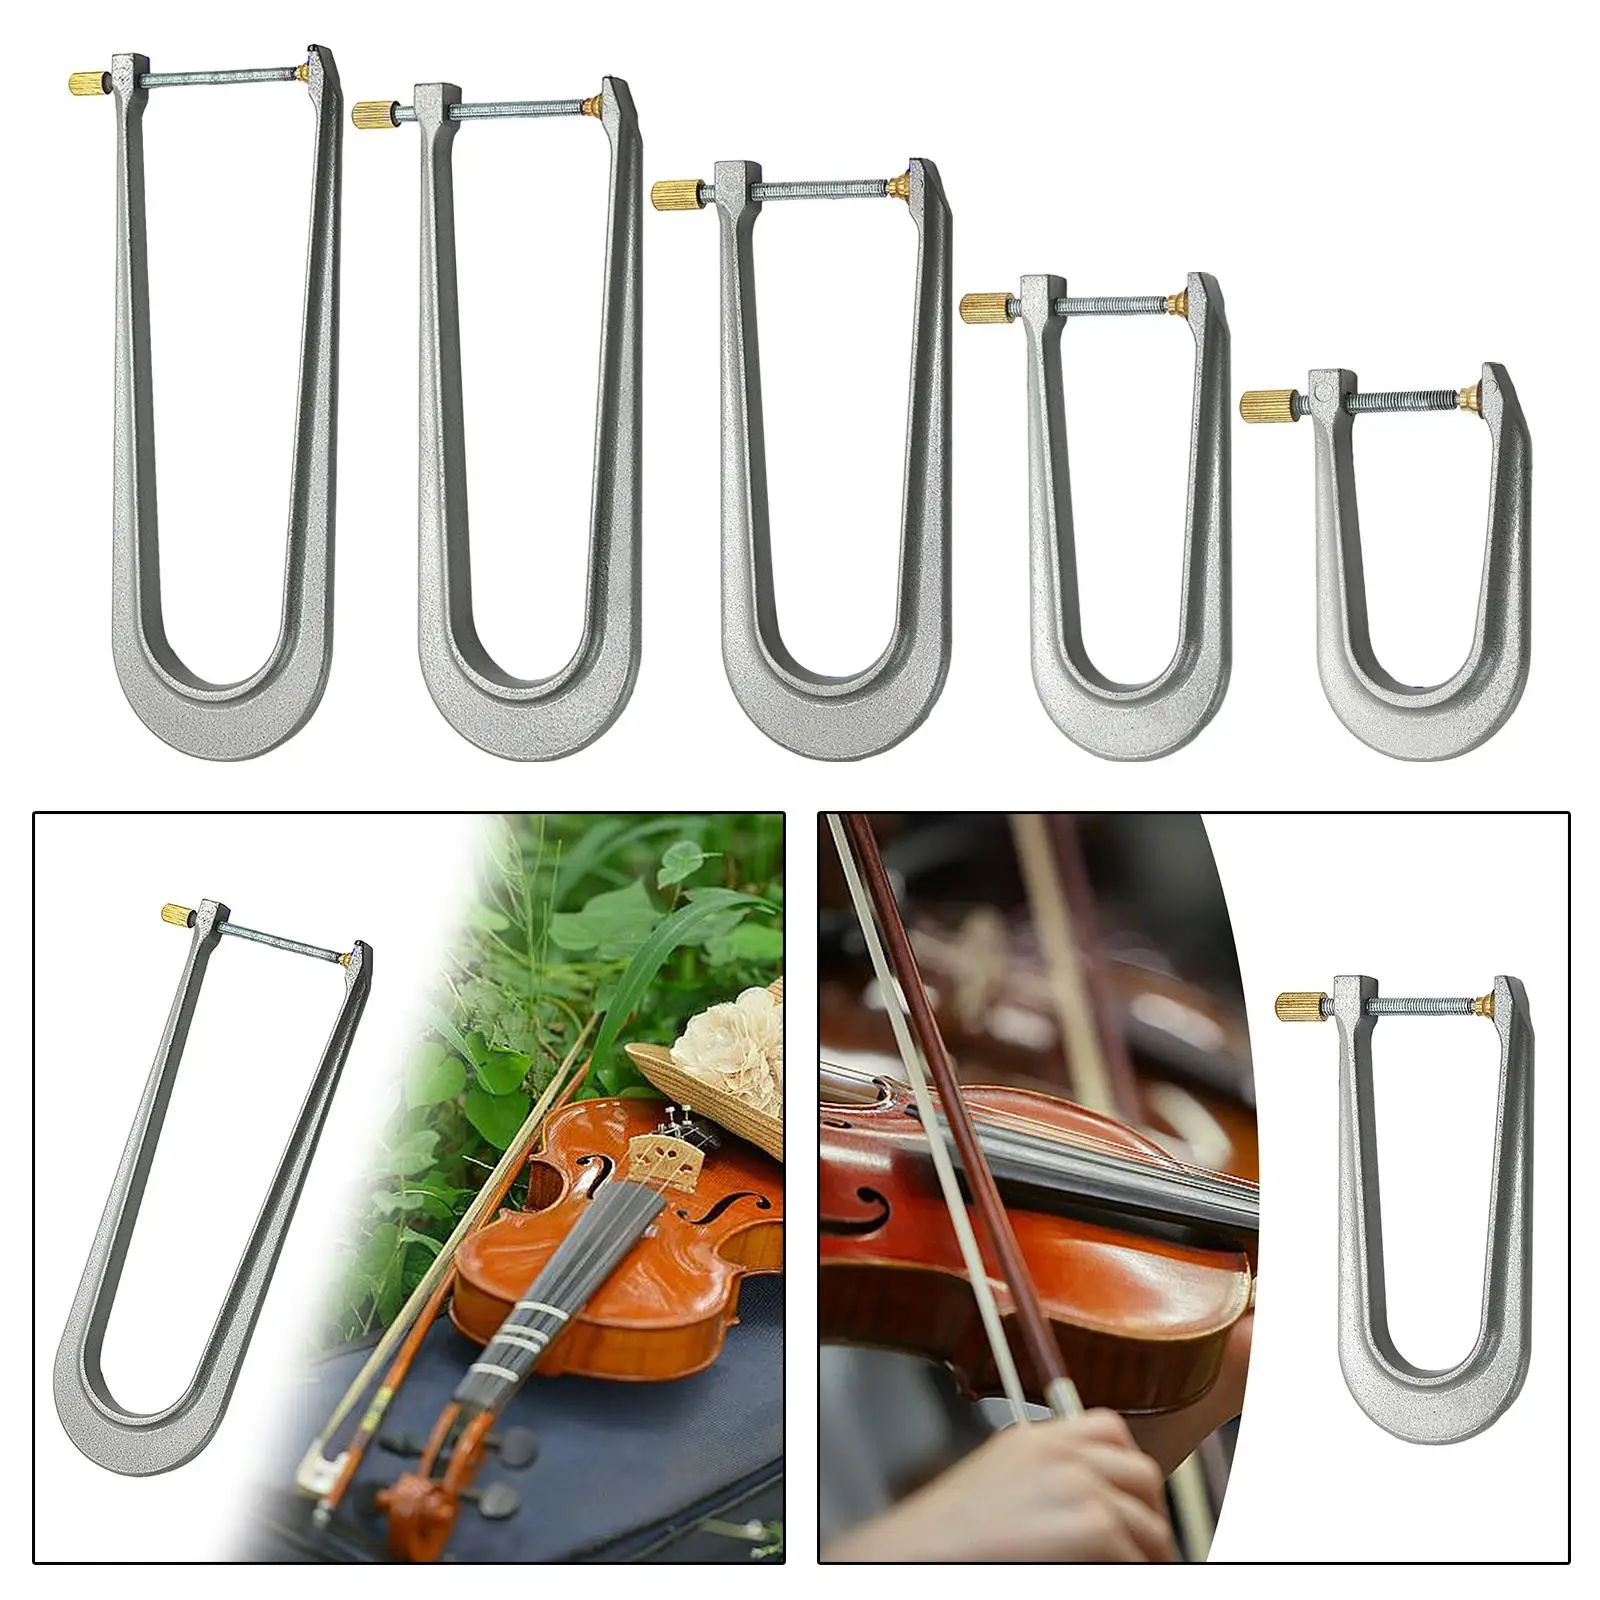 Violin Beam Clamp Metal Easy to Use Universal Parts Replacement Sturdy